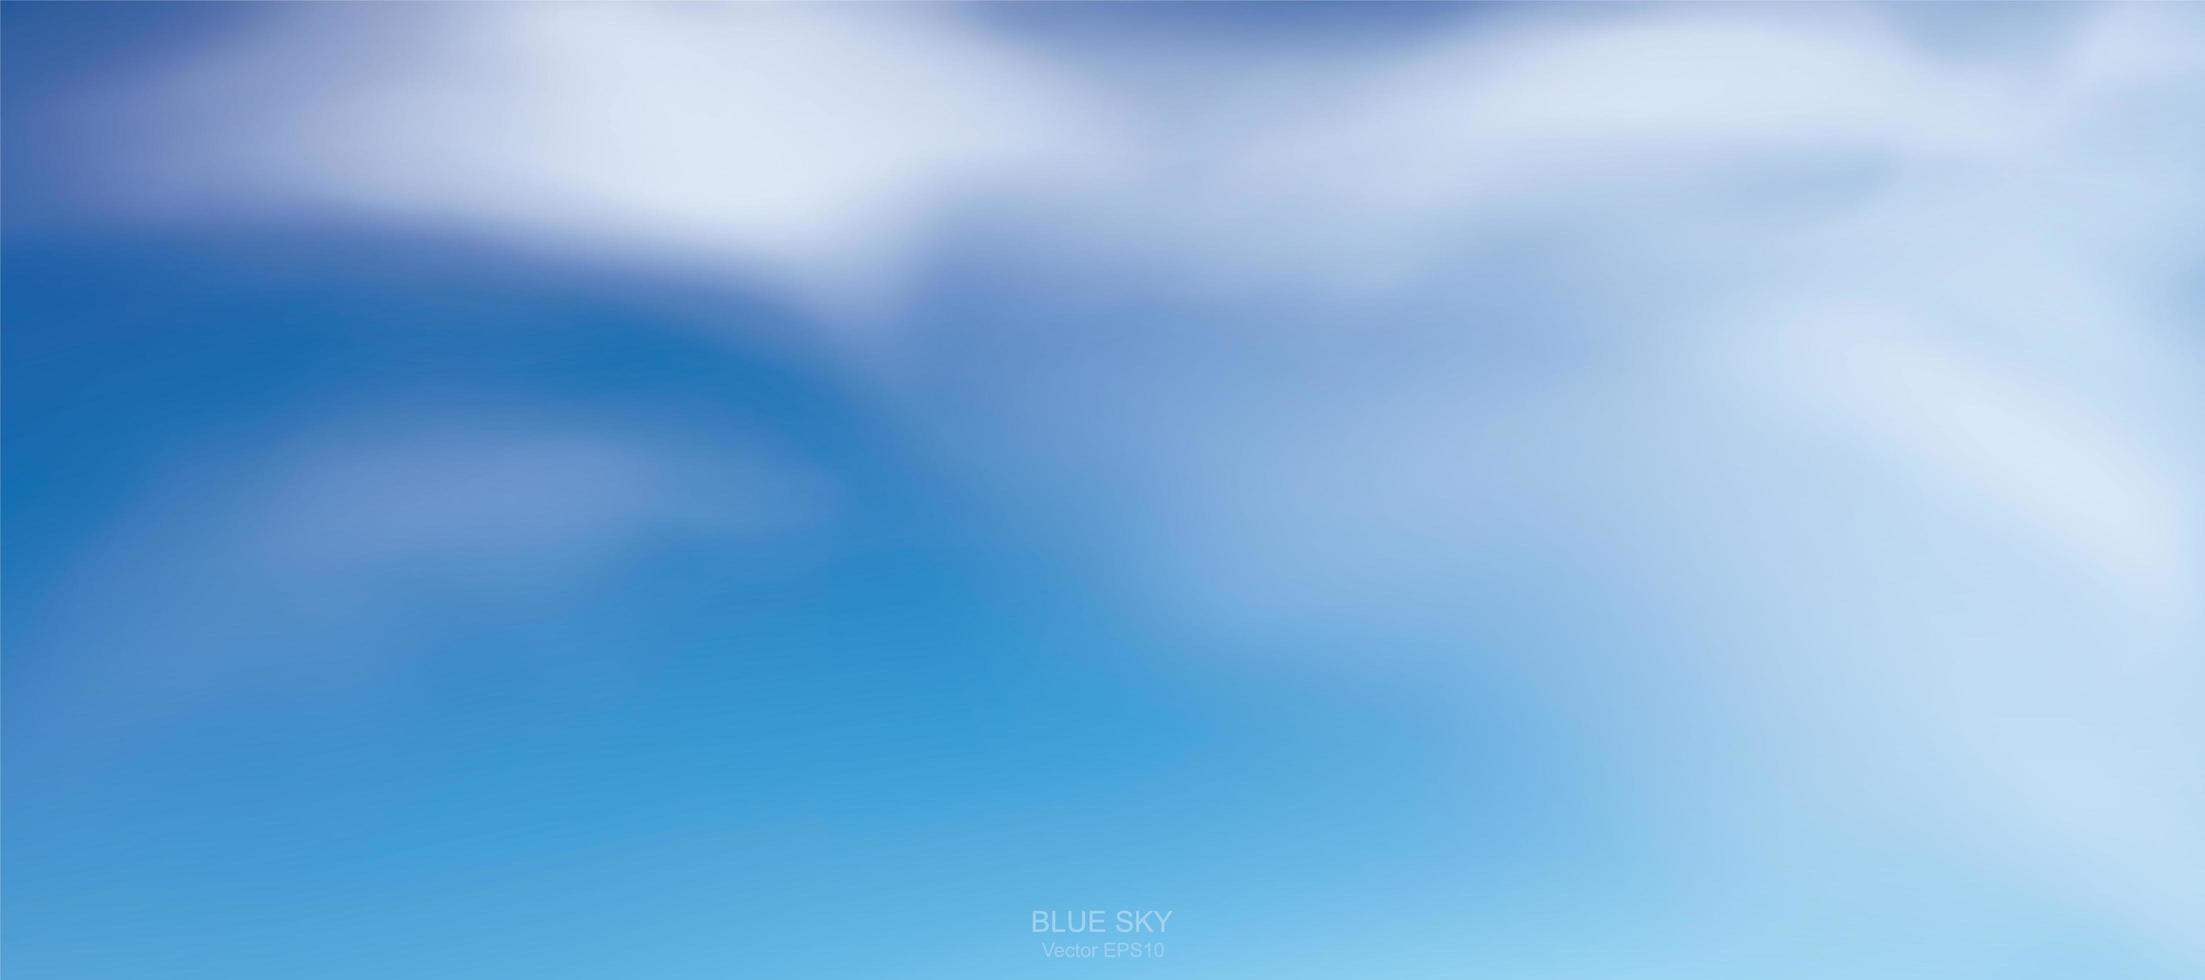 Blue sky background with white clouds vector